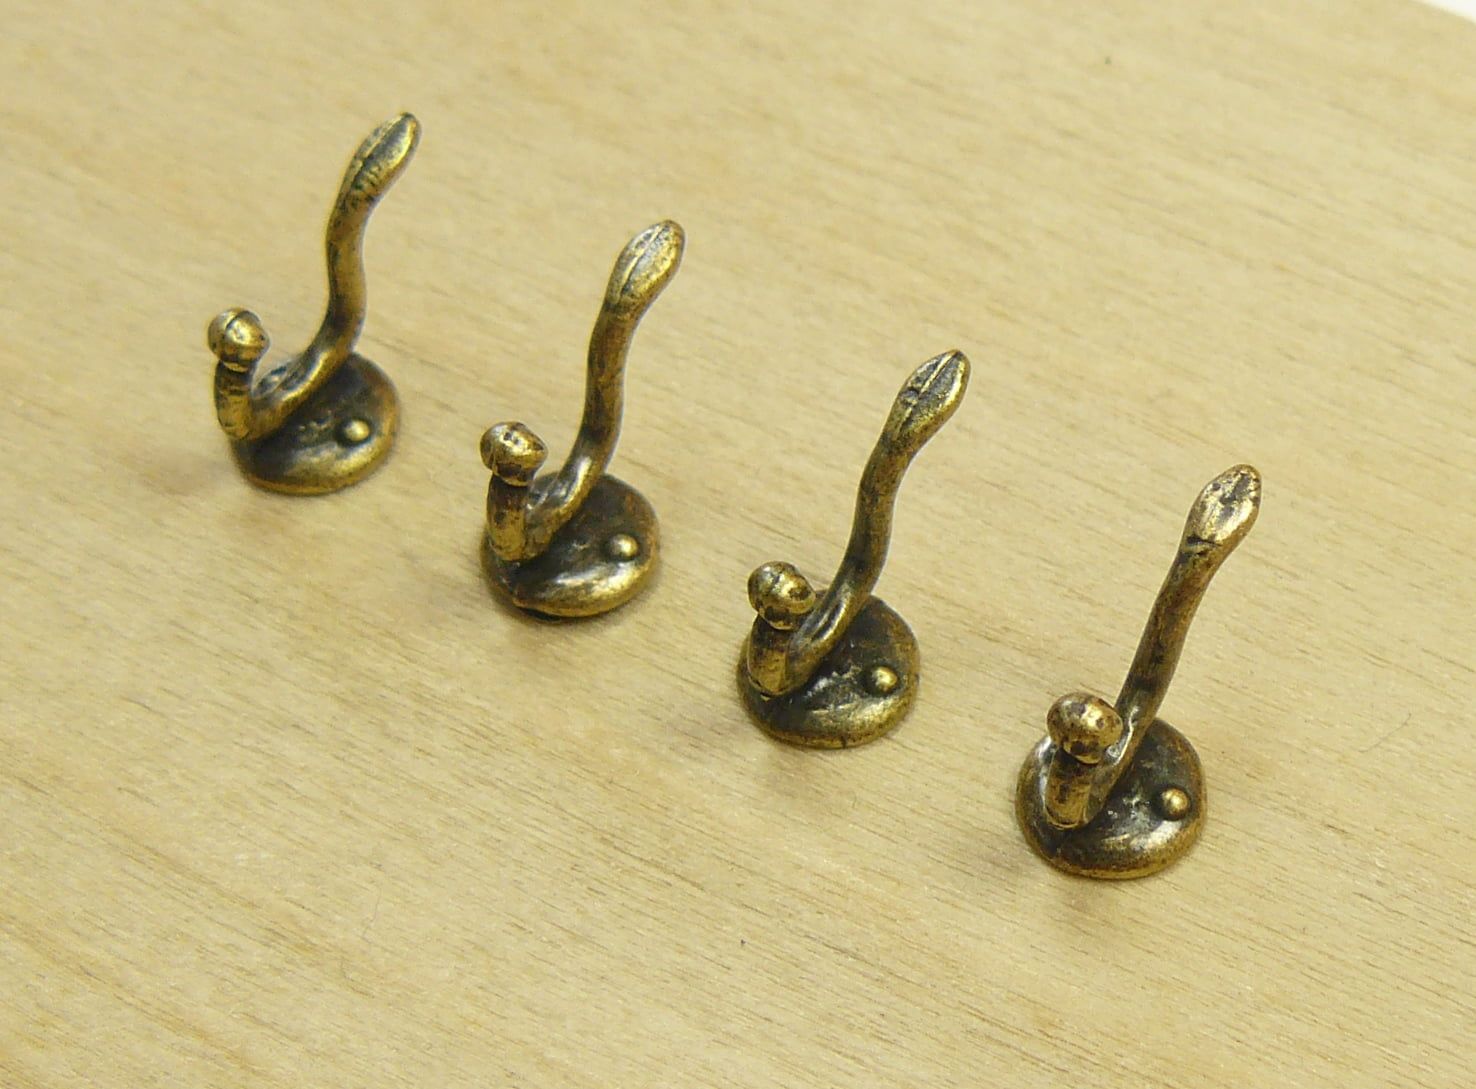 Antique Coat Hooks x 4 for 12th Scale Dolls House